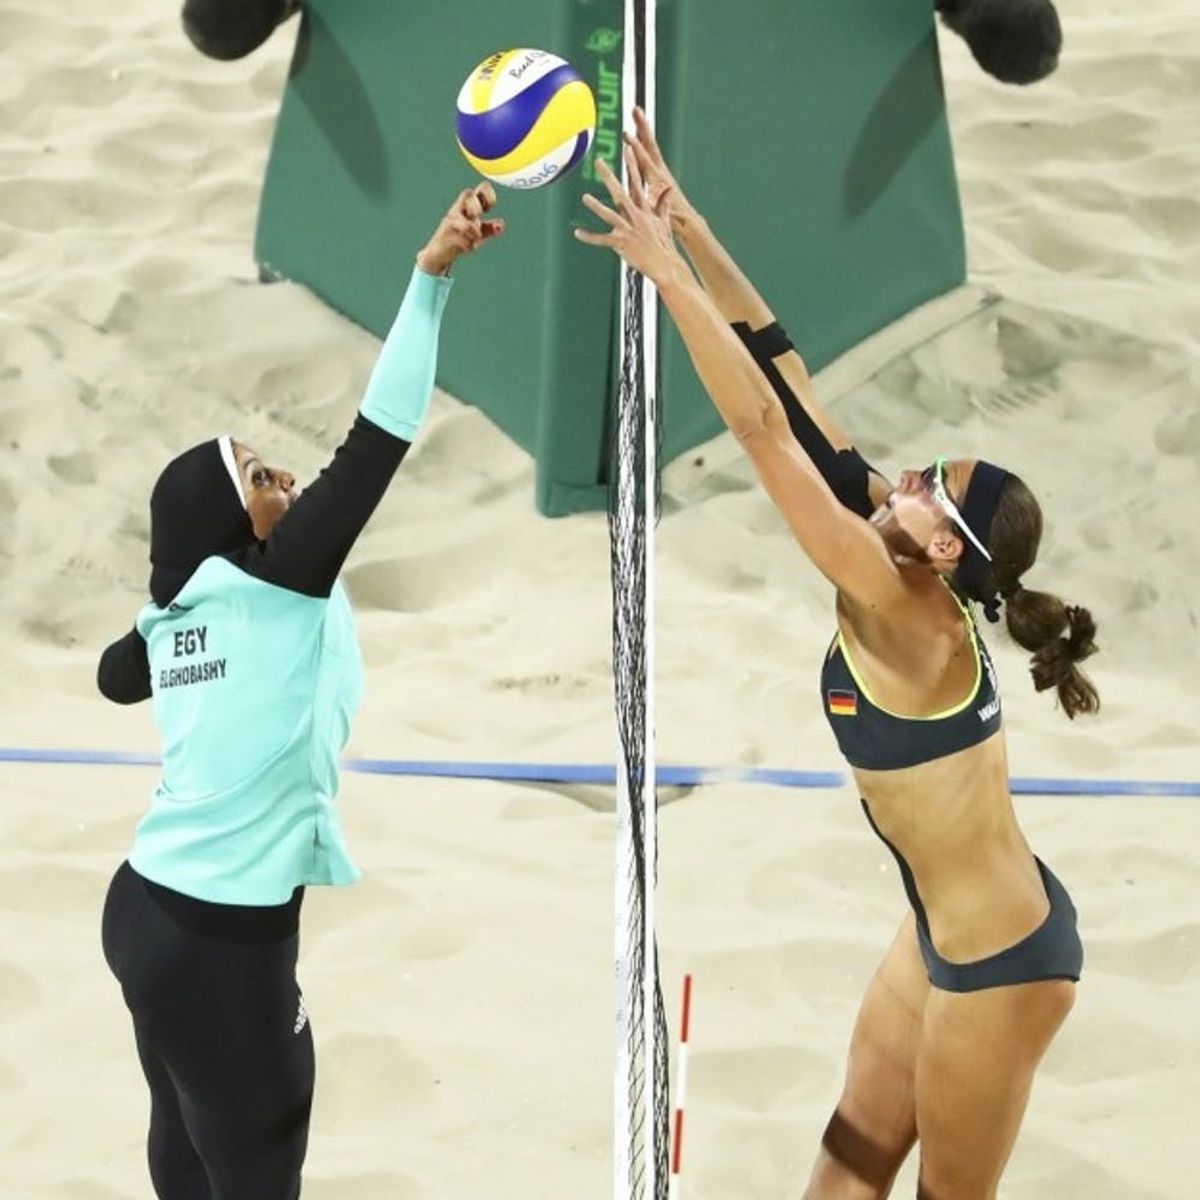 This Photog’s Olympic Beach Volleyball Pic Has Sparked Some Serious Controversy